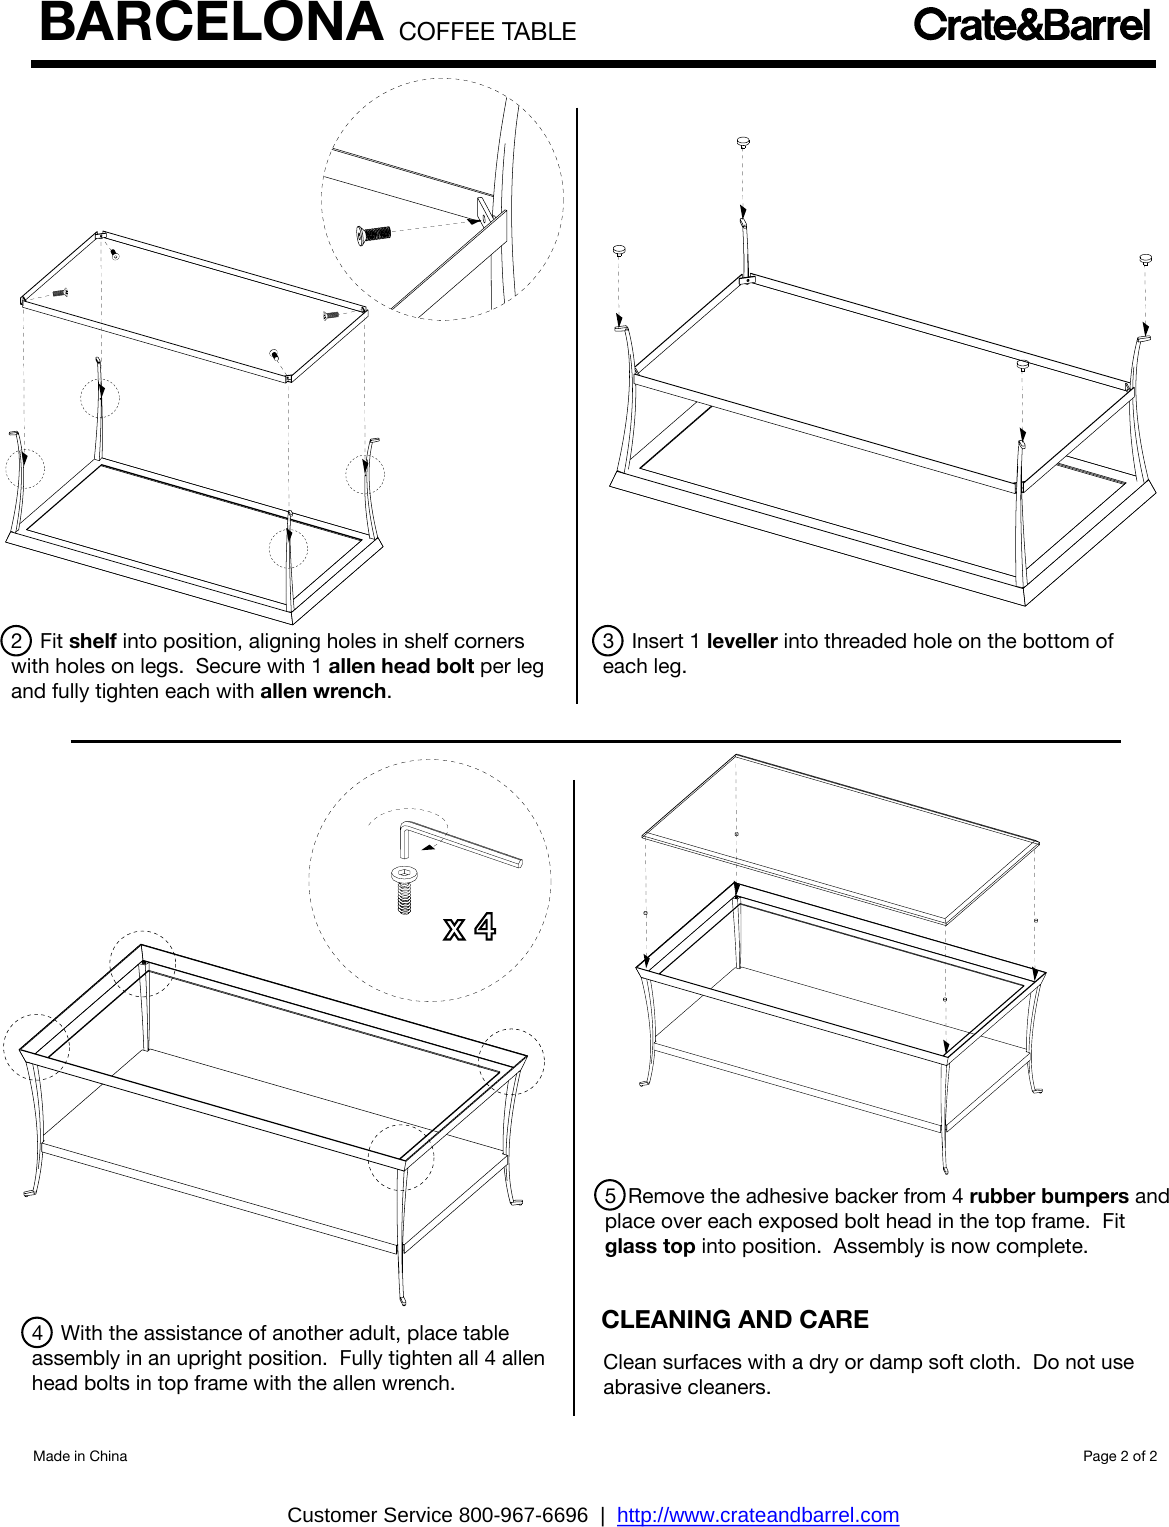 Page 2 of 2 - Crate-Barrel 271-Barcelona-Coffee-Table Barcelona Coffee Table Assembly Instructions From Crate And Barrel